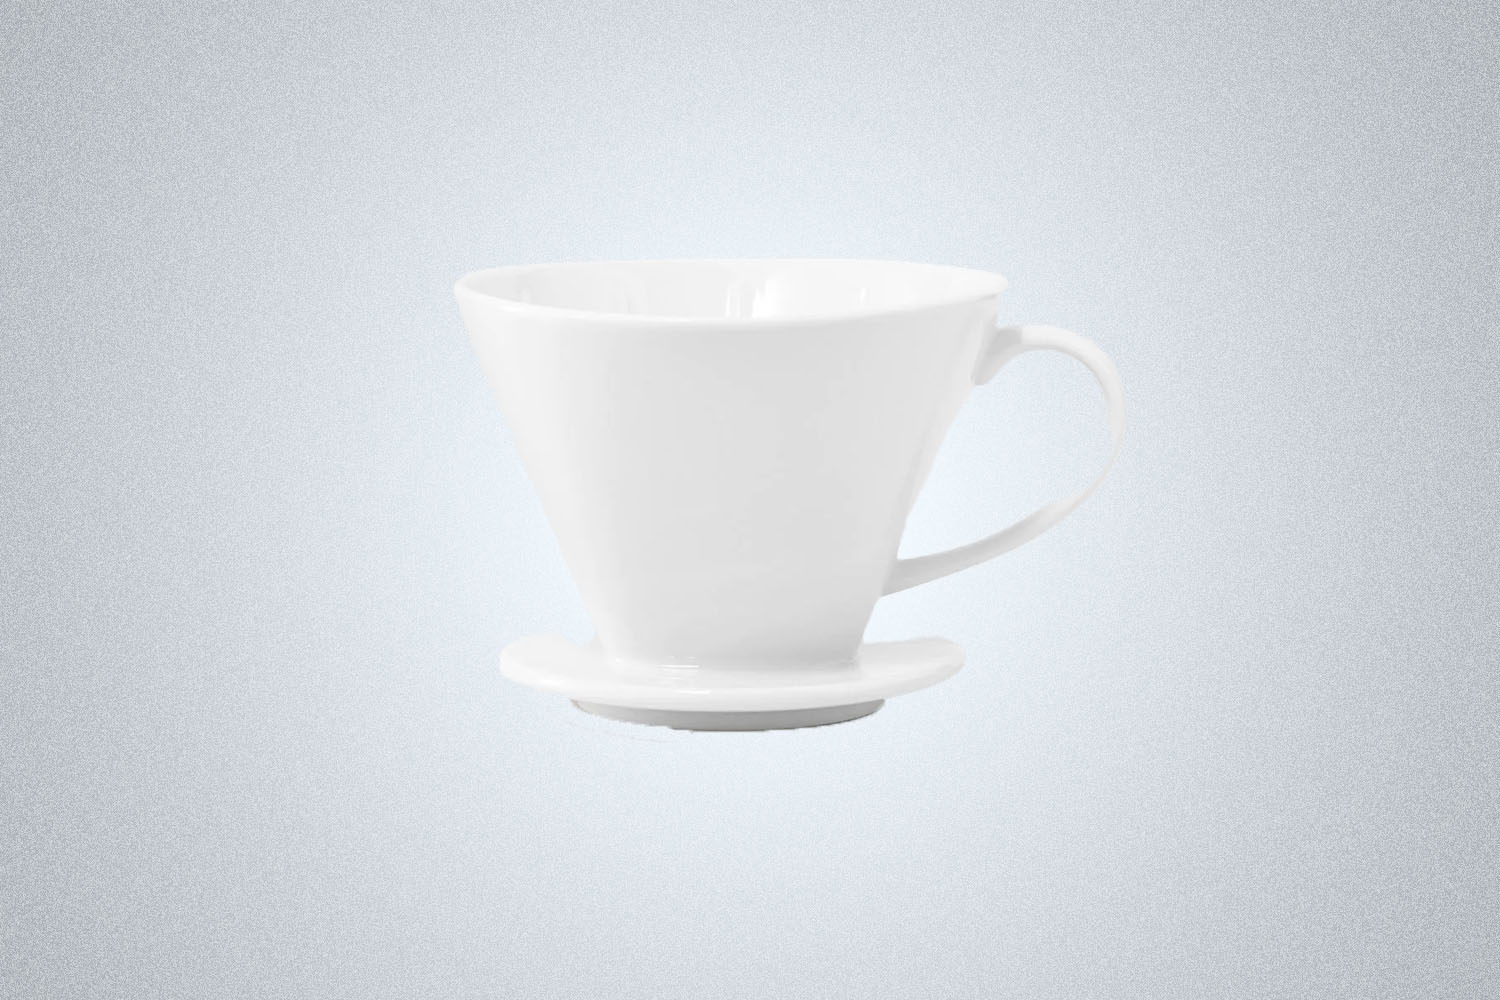 The Public Good Pour Over Coffee Maker in white on a gray background